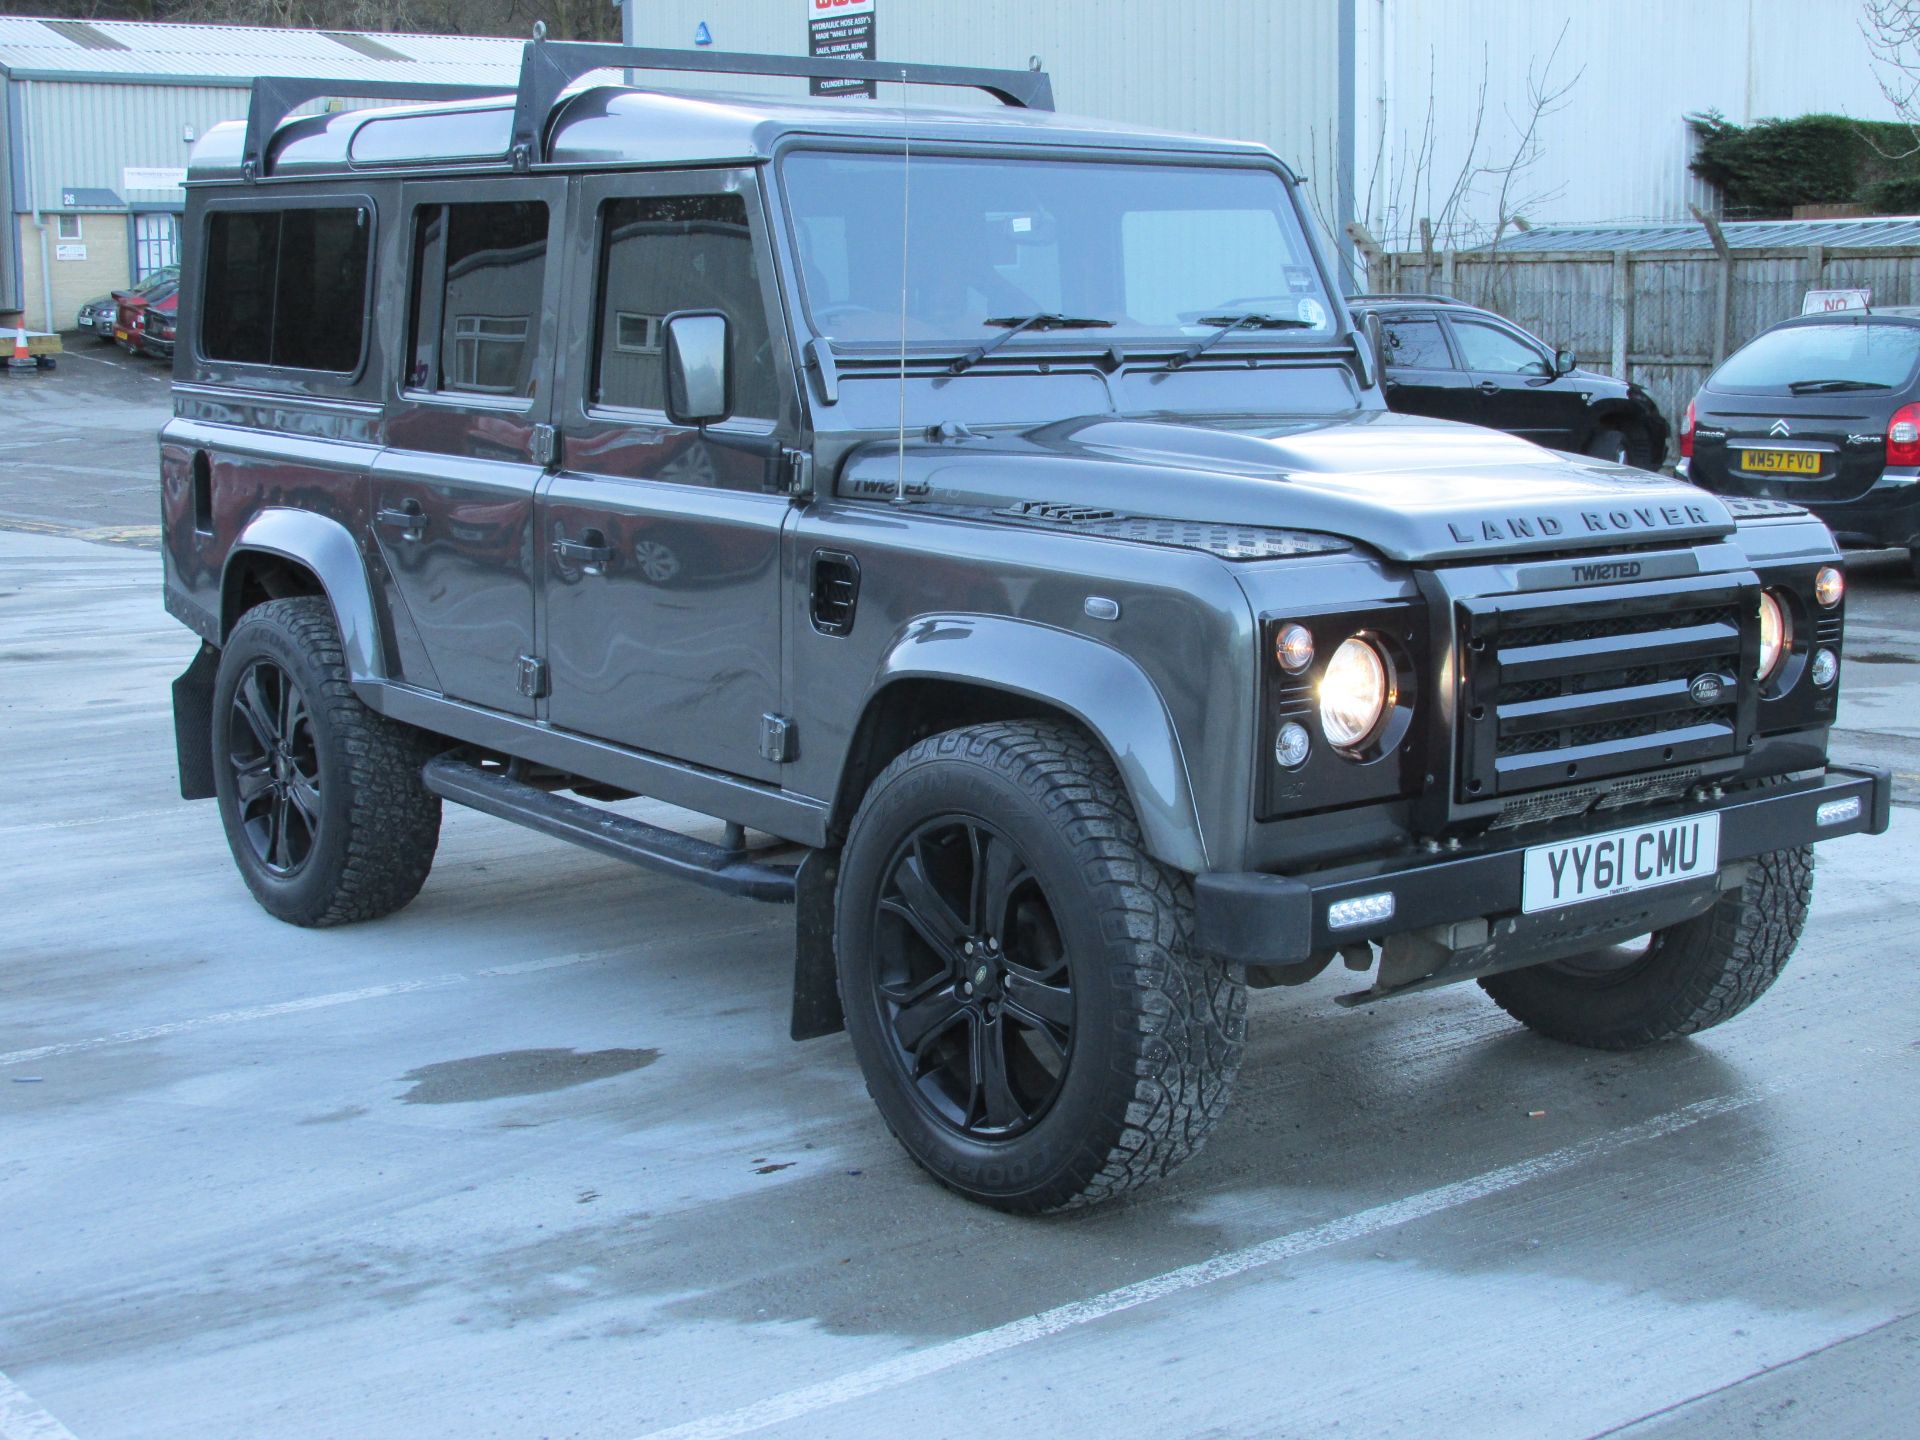 'TWISTED' - Rare Land Rover Defender Genuine PS 10 Built by Twisted Yorkshire - Image 2 of 50